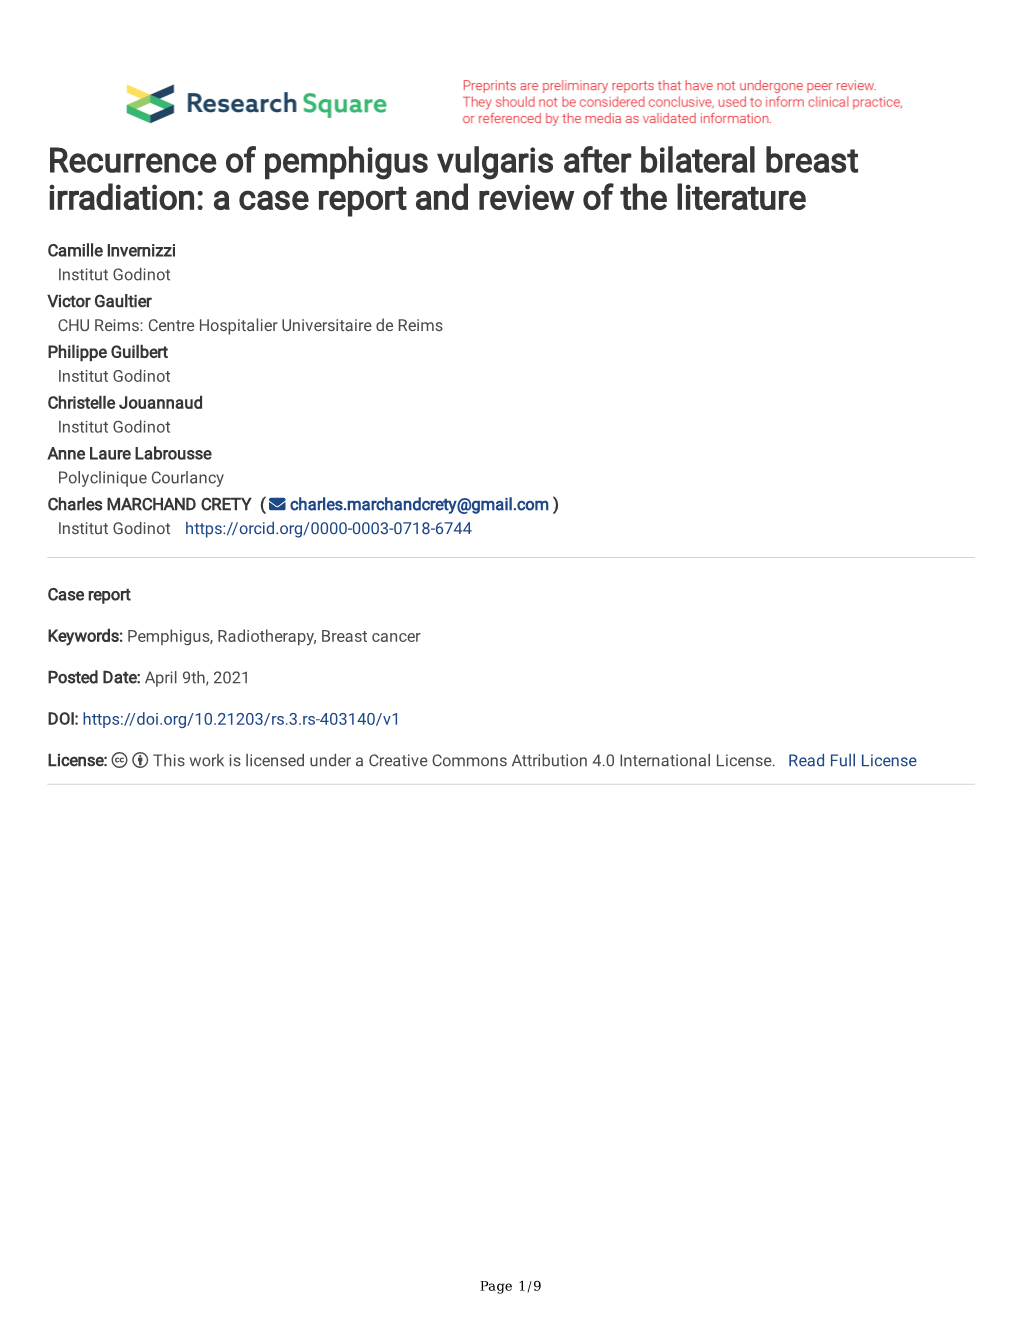 Recurrence of Pemphigus Vulgaris After Bilateral Breast Irradiation: a Case Report and Review of the Literature